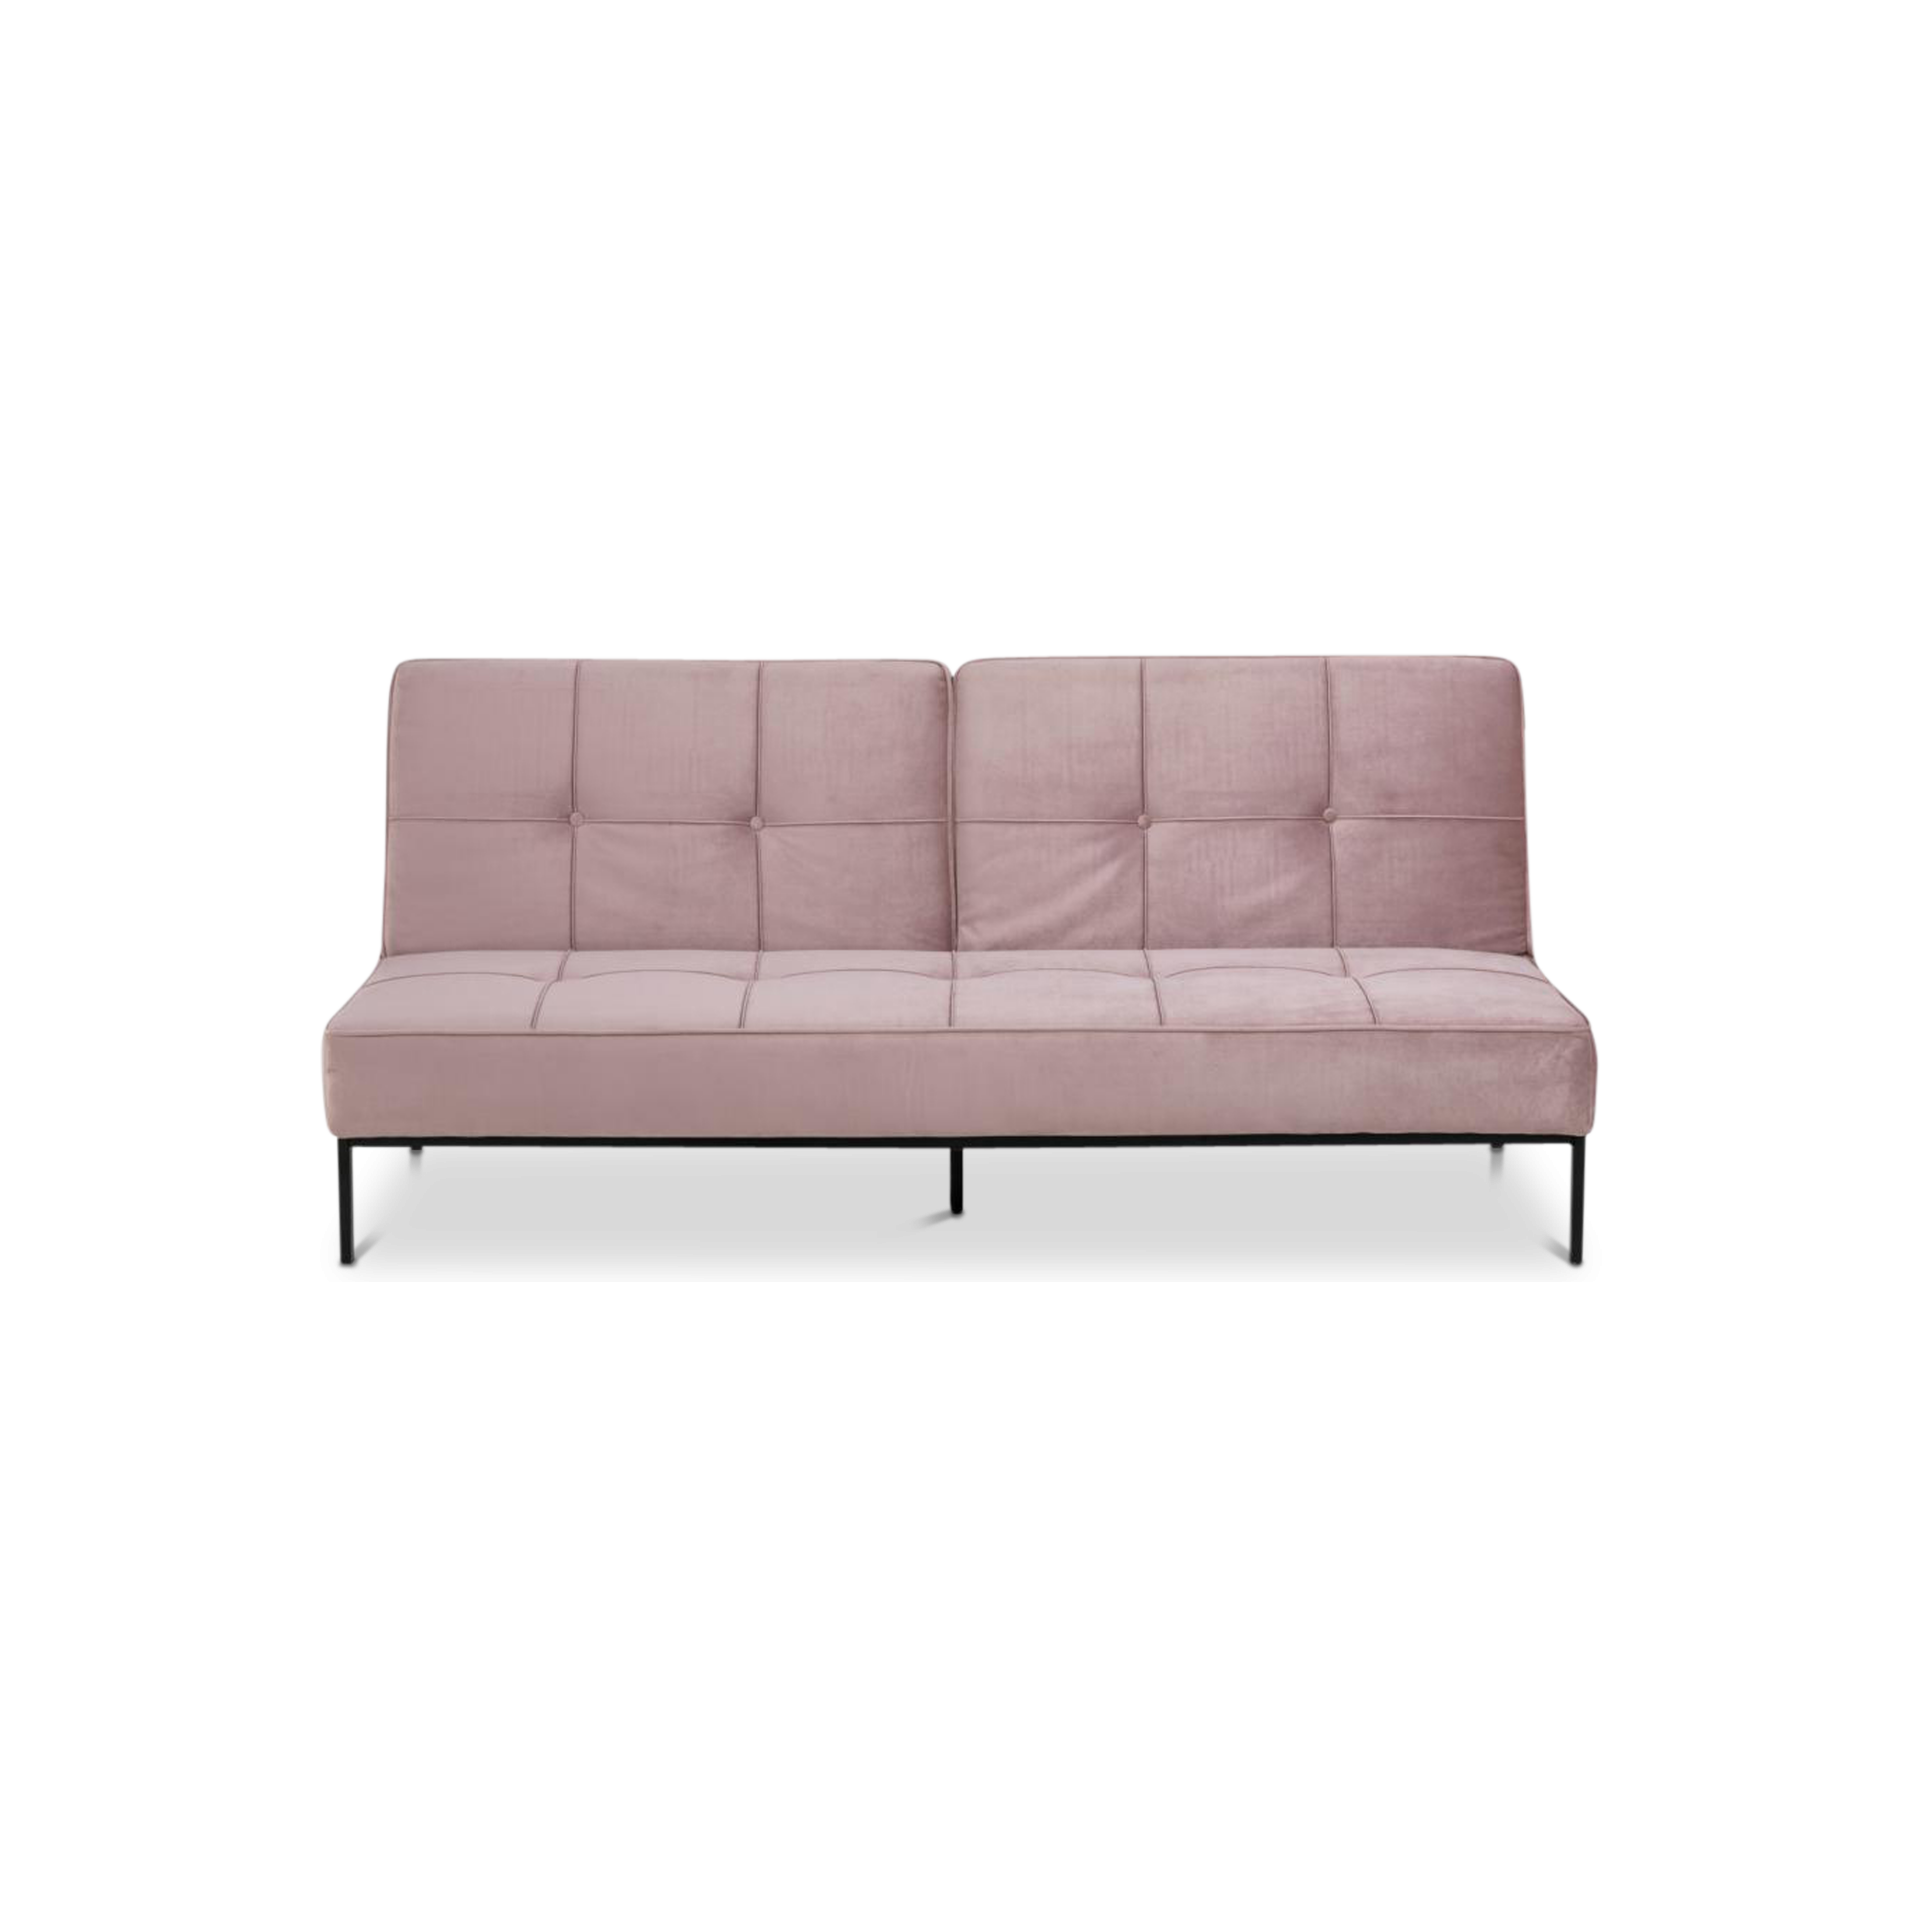 Sofabed ISTERIA VIC fabric dusty rose 18